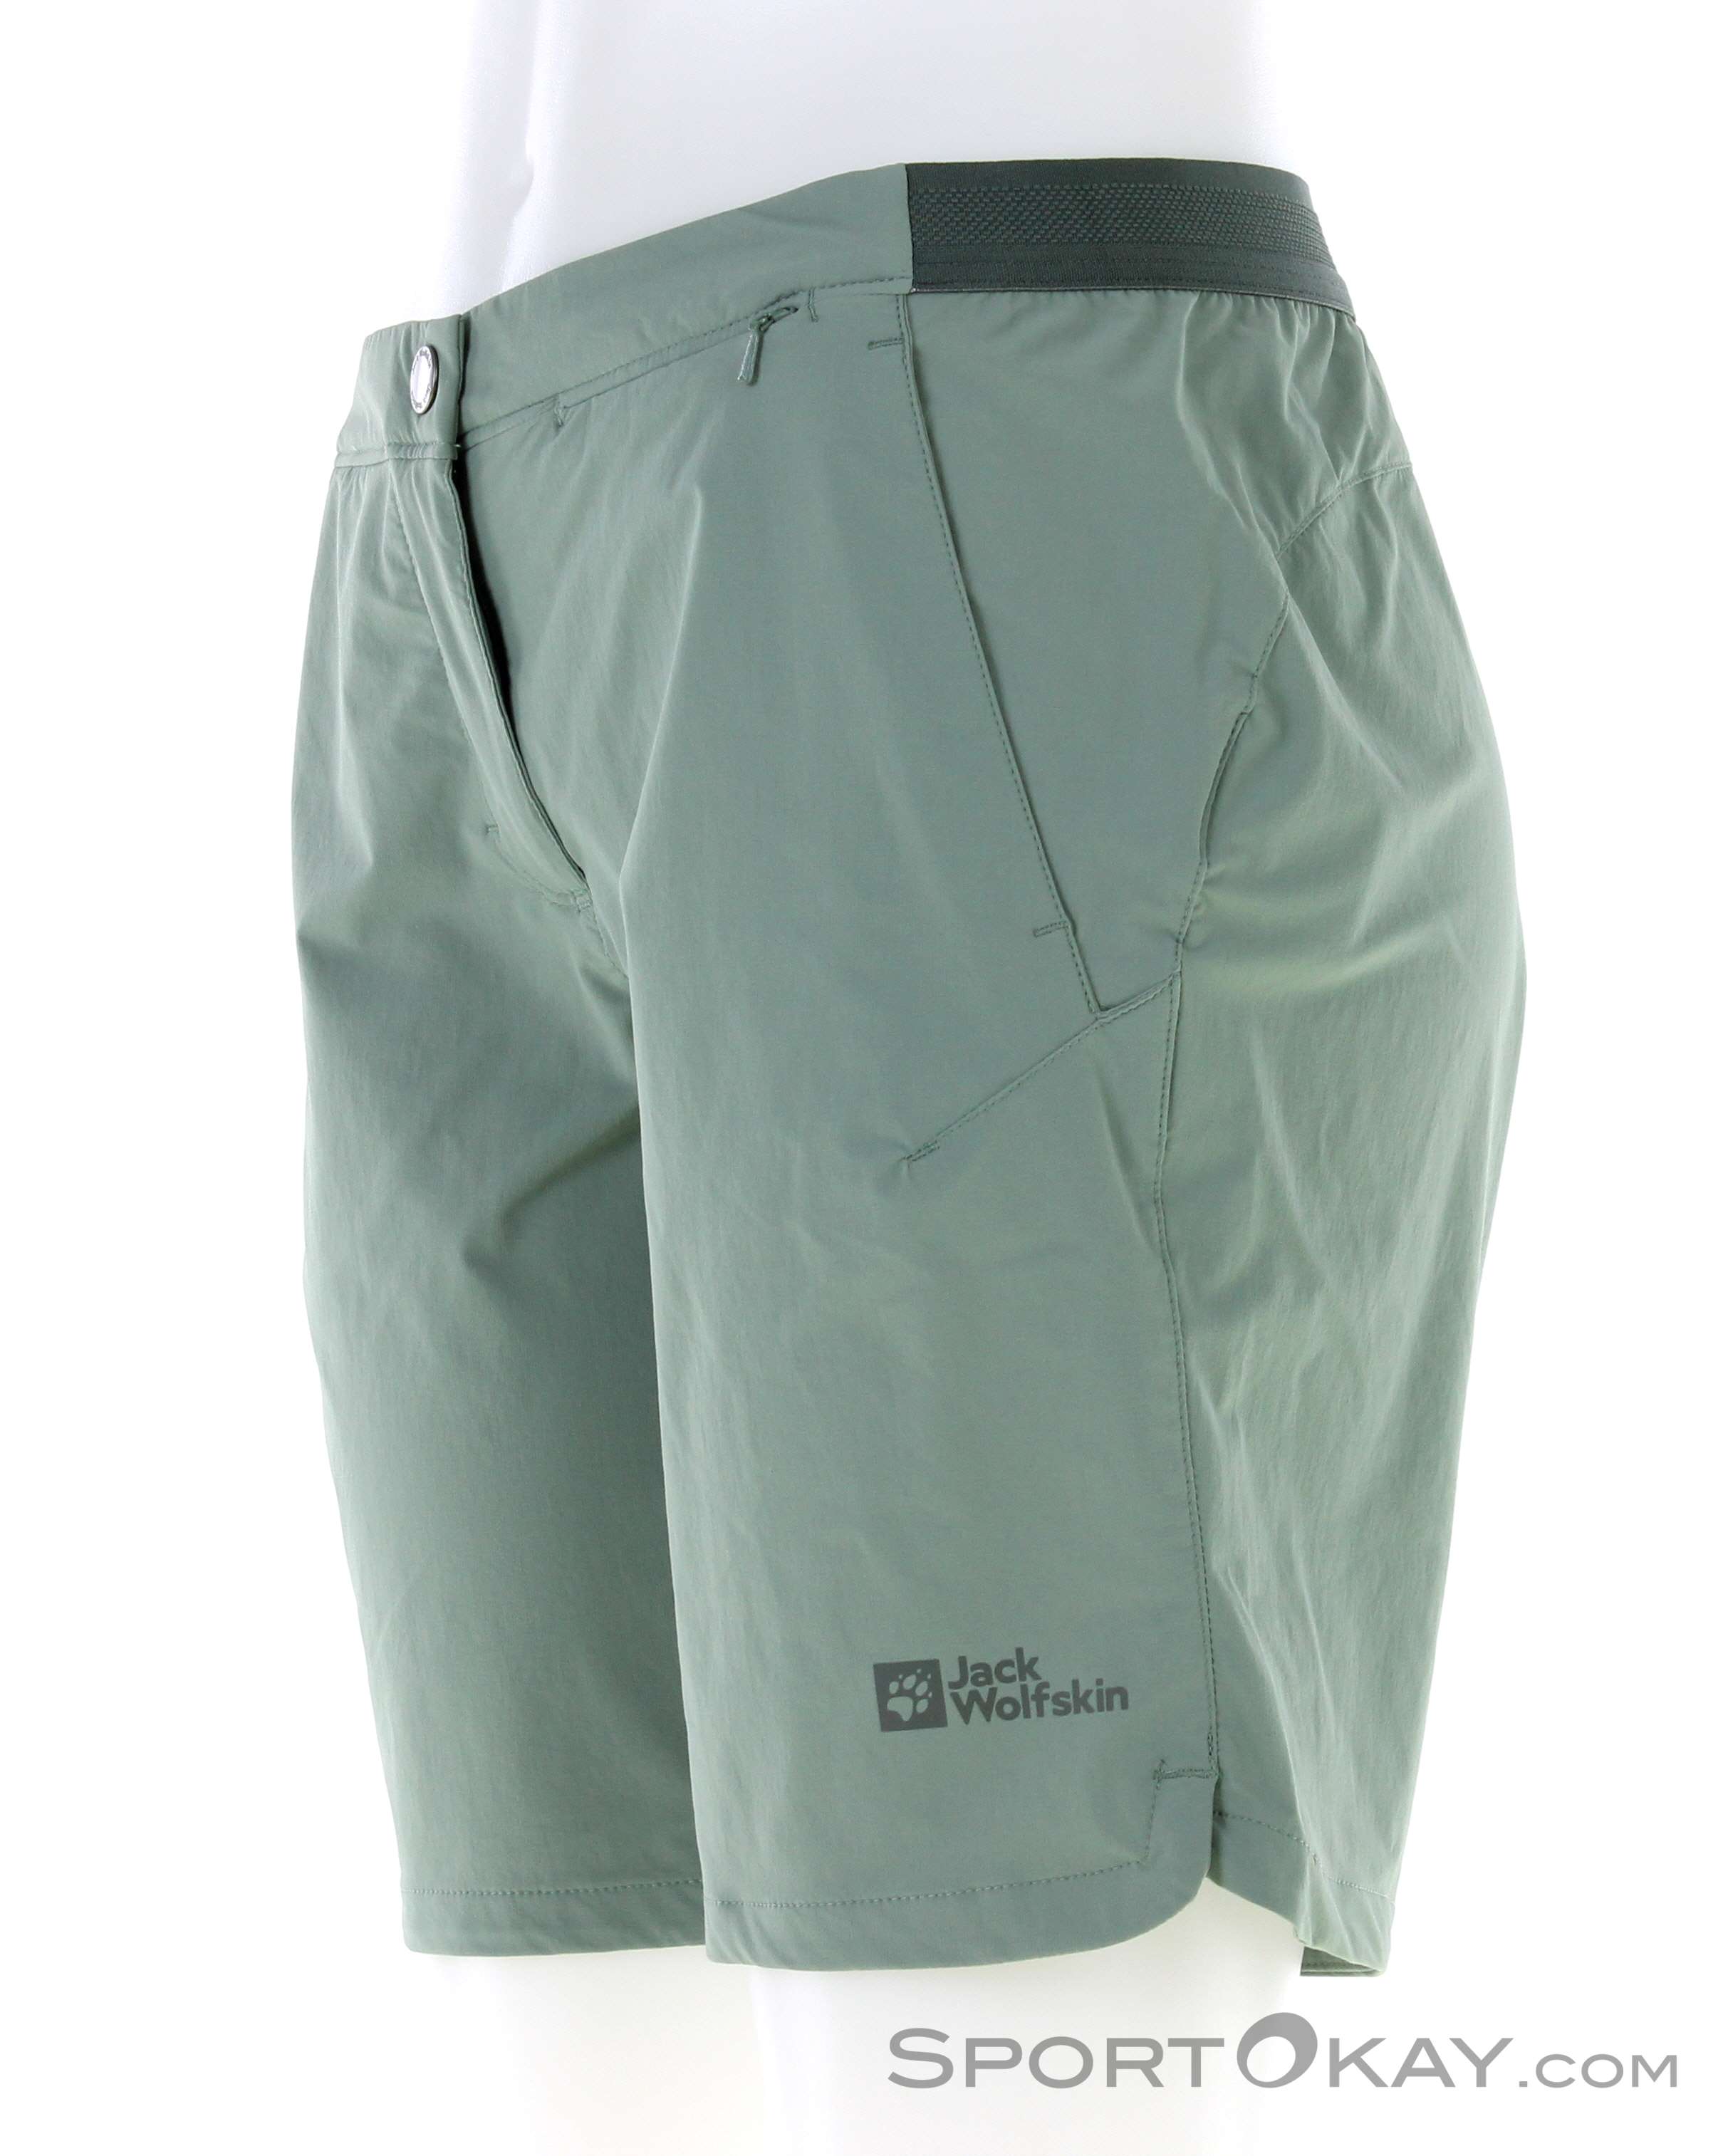 Jack Wolfskin Shorts Pants Outdoor Hilltop Clothing - - Trail All - - Outdoor Women Outdoor